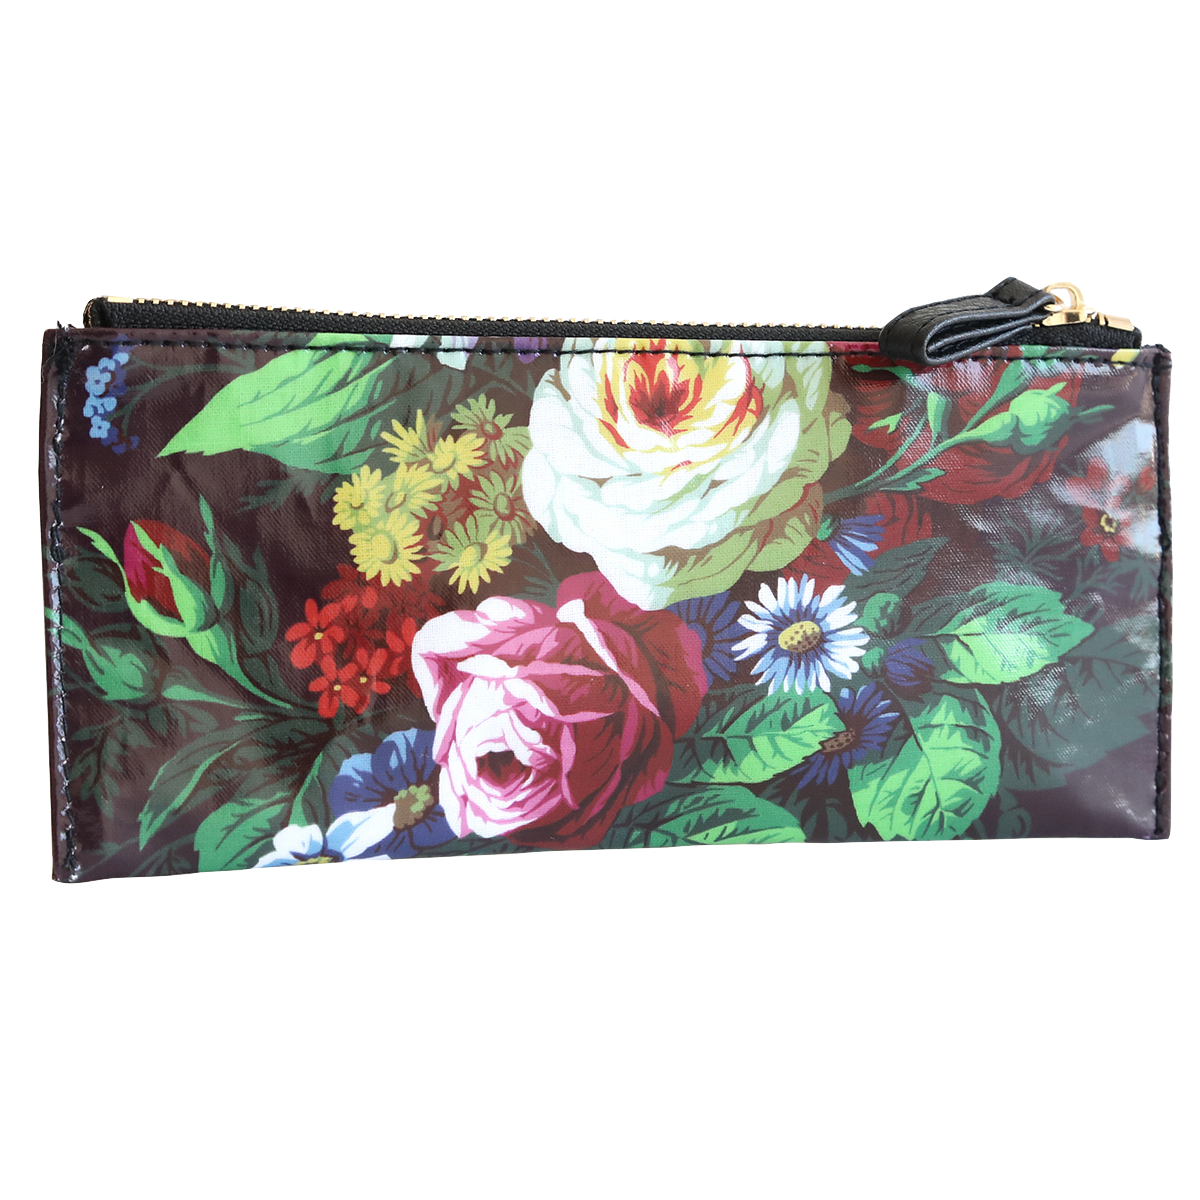 Astrid Pencil Case designed to store craft tools, featuring a variety of brightly colored flowers on a dark background.